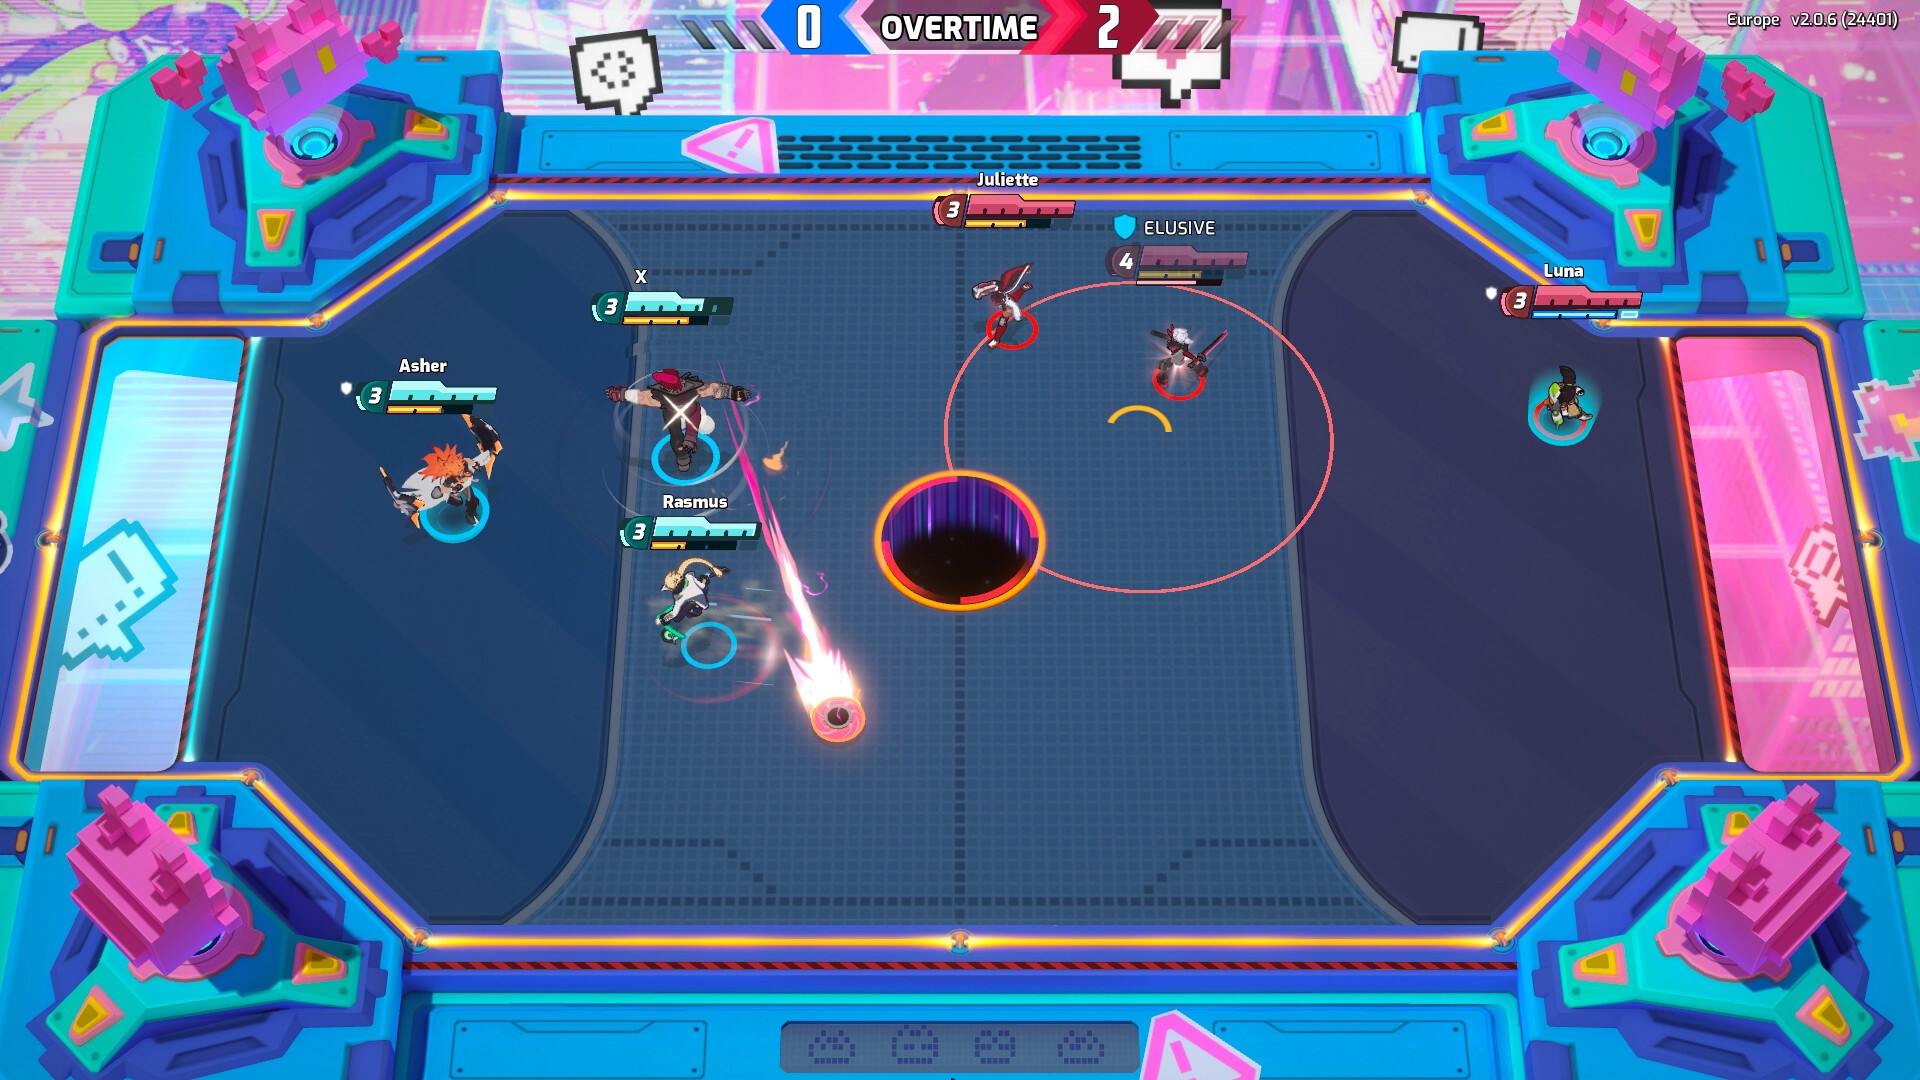 feature image for our omega strikers codes guide, the image features a promo screenshot of a top-down match showcasing the arena, scoreboard, and characters taking part in a match